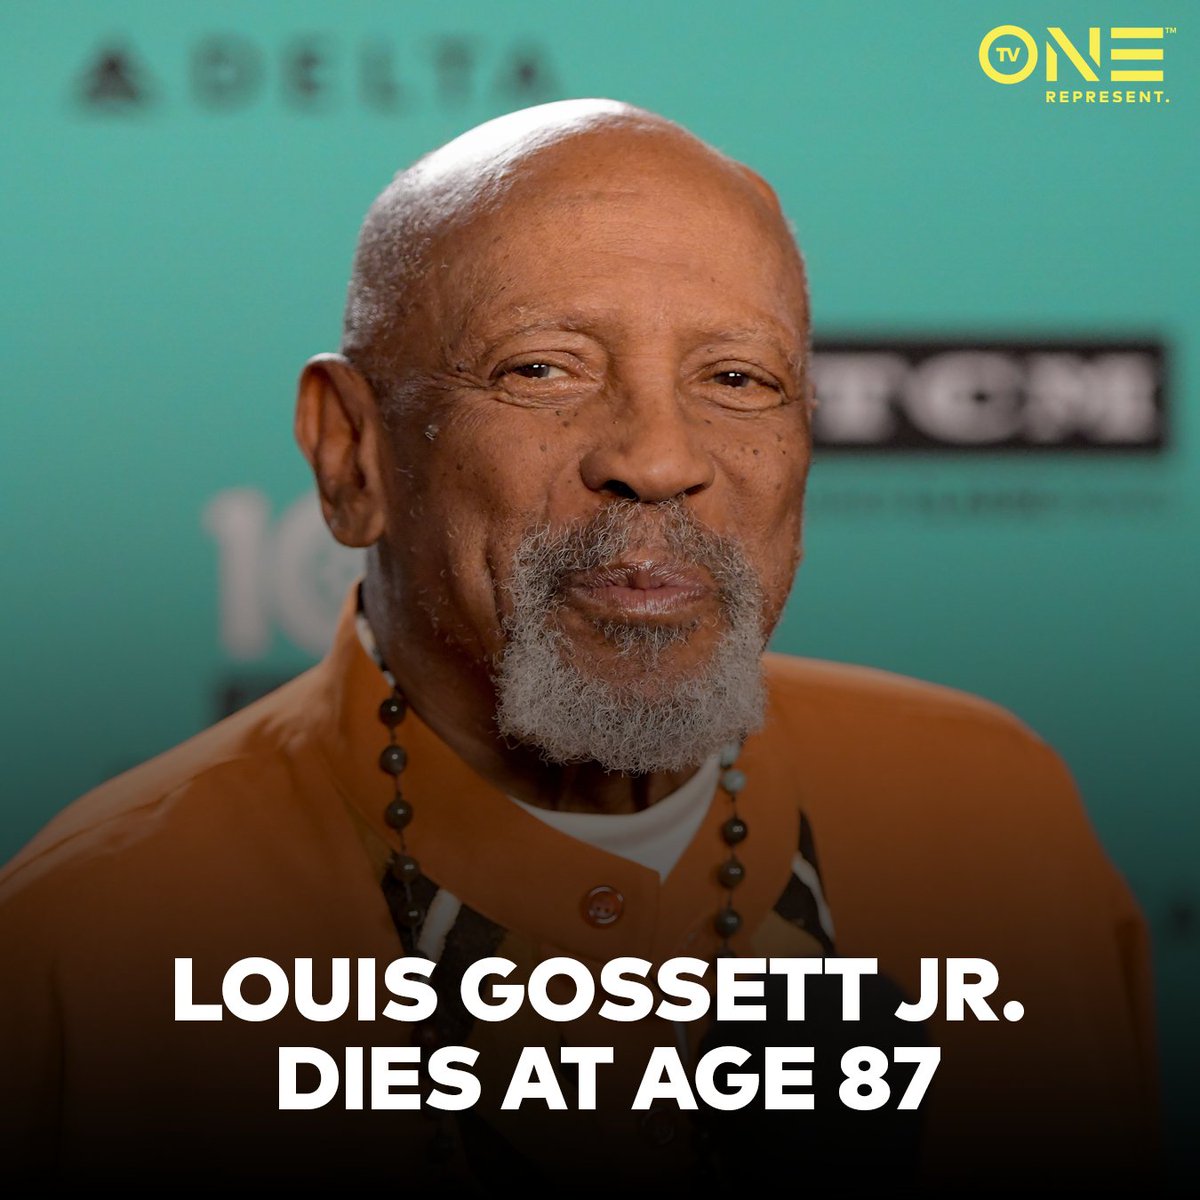 We are saddened to share that Louis Gossett Jr., the first Black man to win the supporting actor Oscar for his role in 'An Officer and a Gentleman,' has died at 87. Rest in Power. 🙏🏾